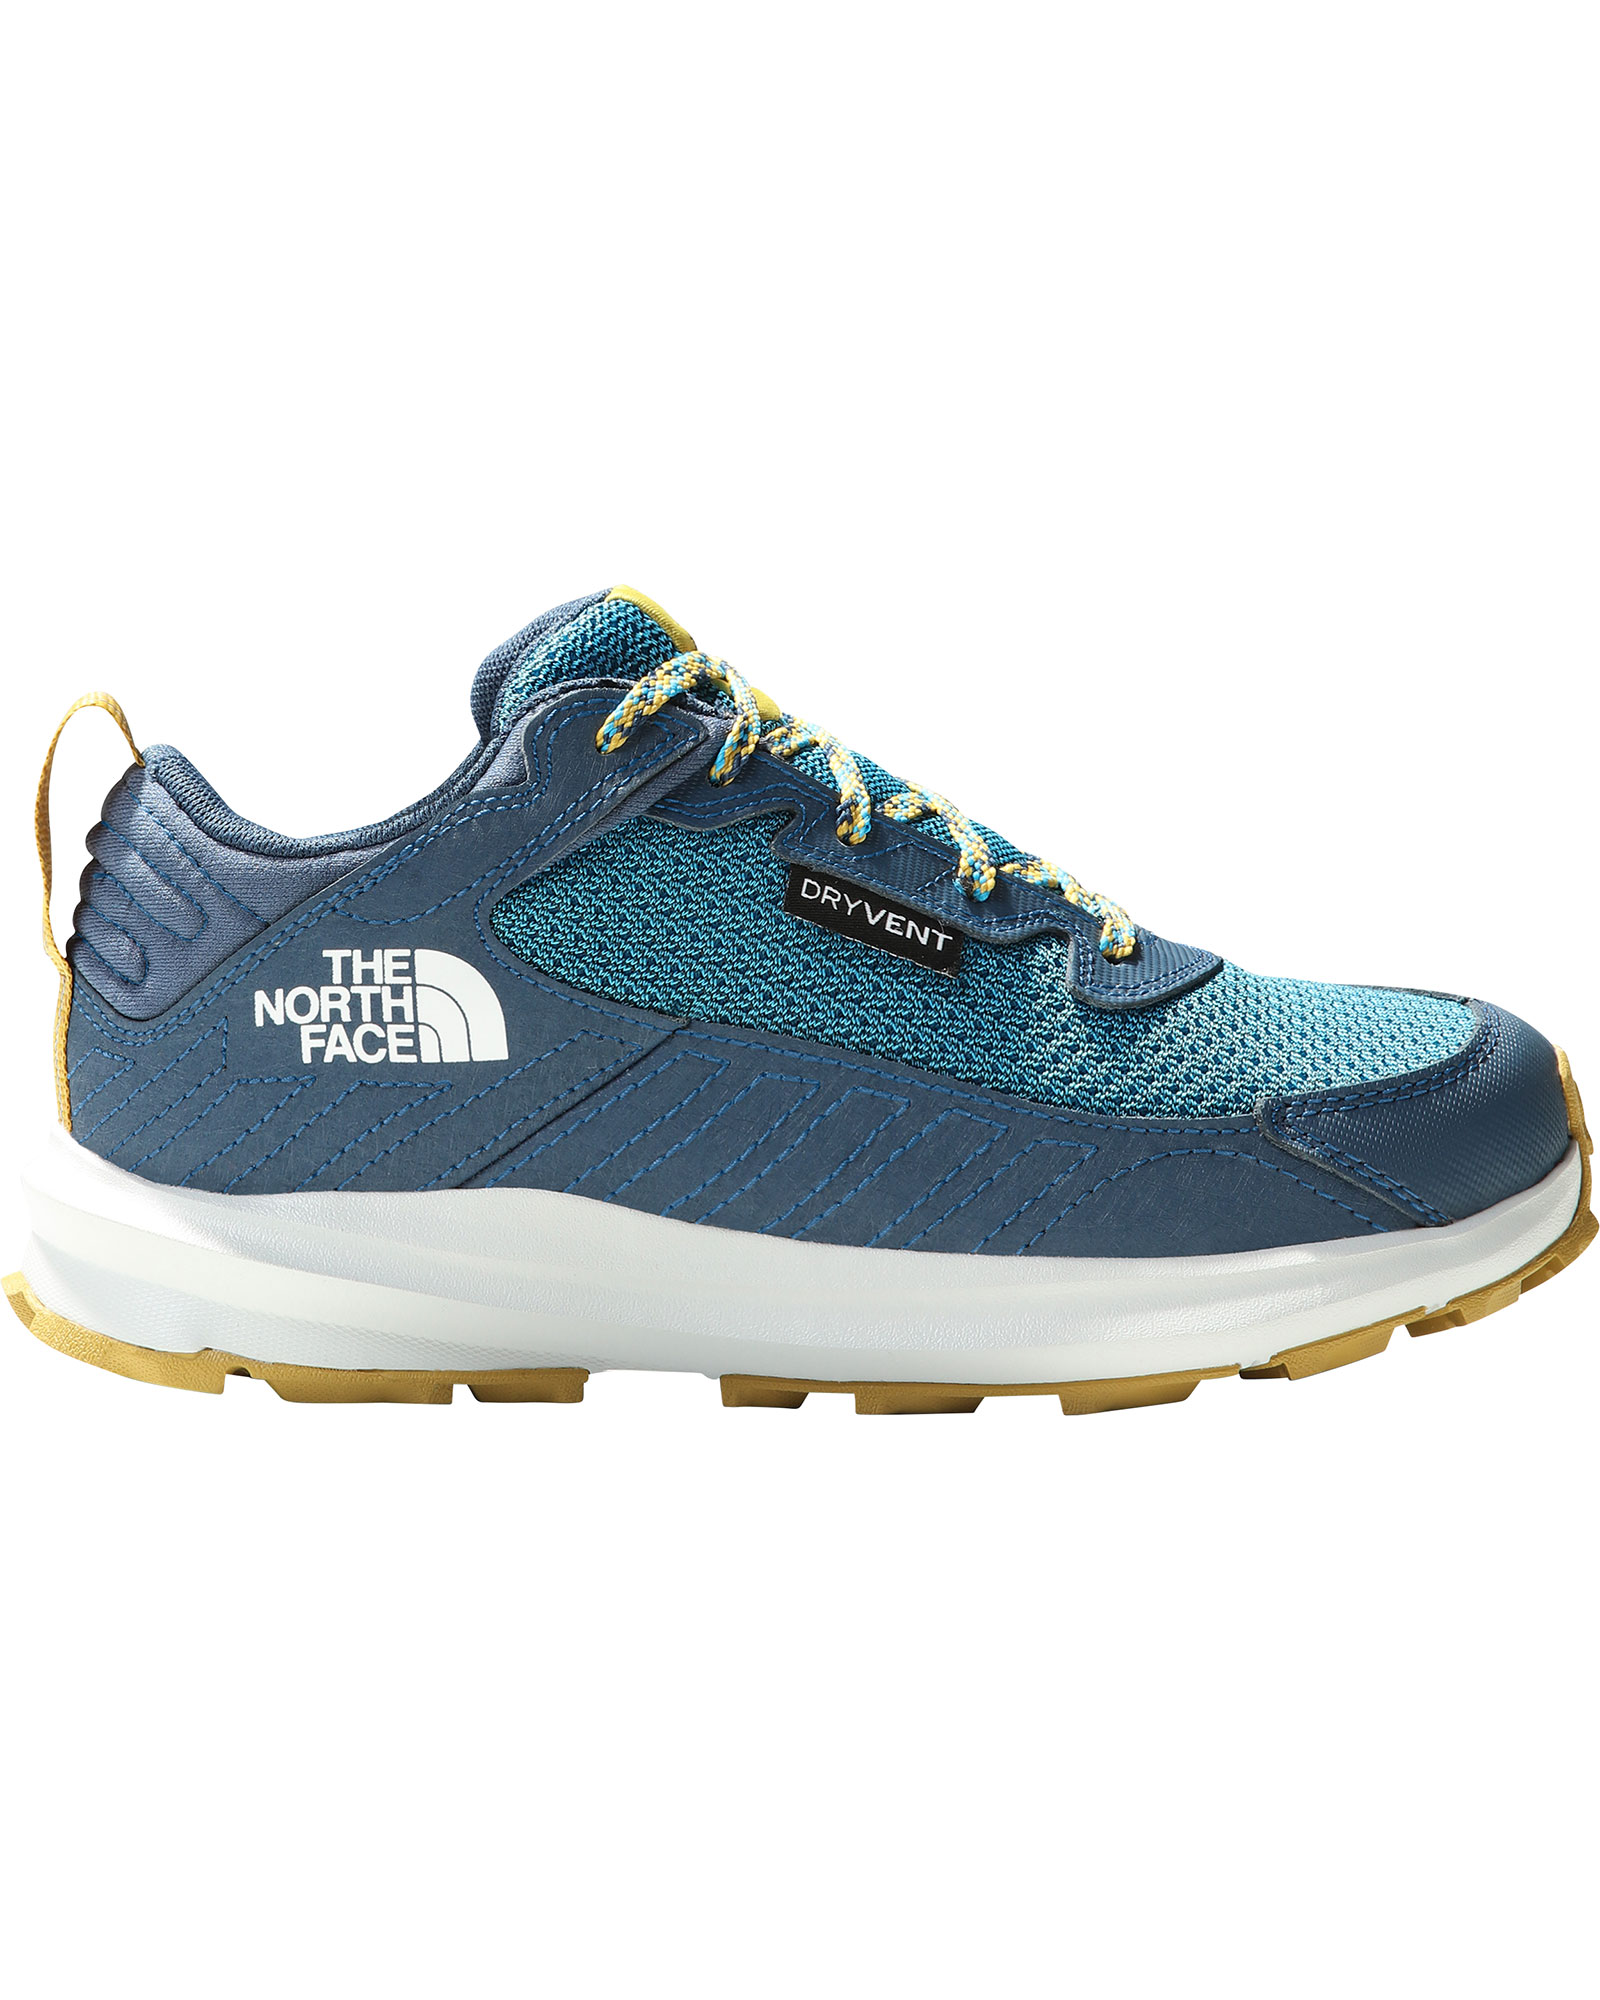 The North Face Youth Fastpack Hiker Kids' Waterproof Shoes